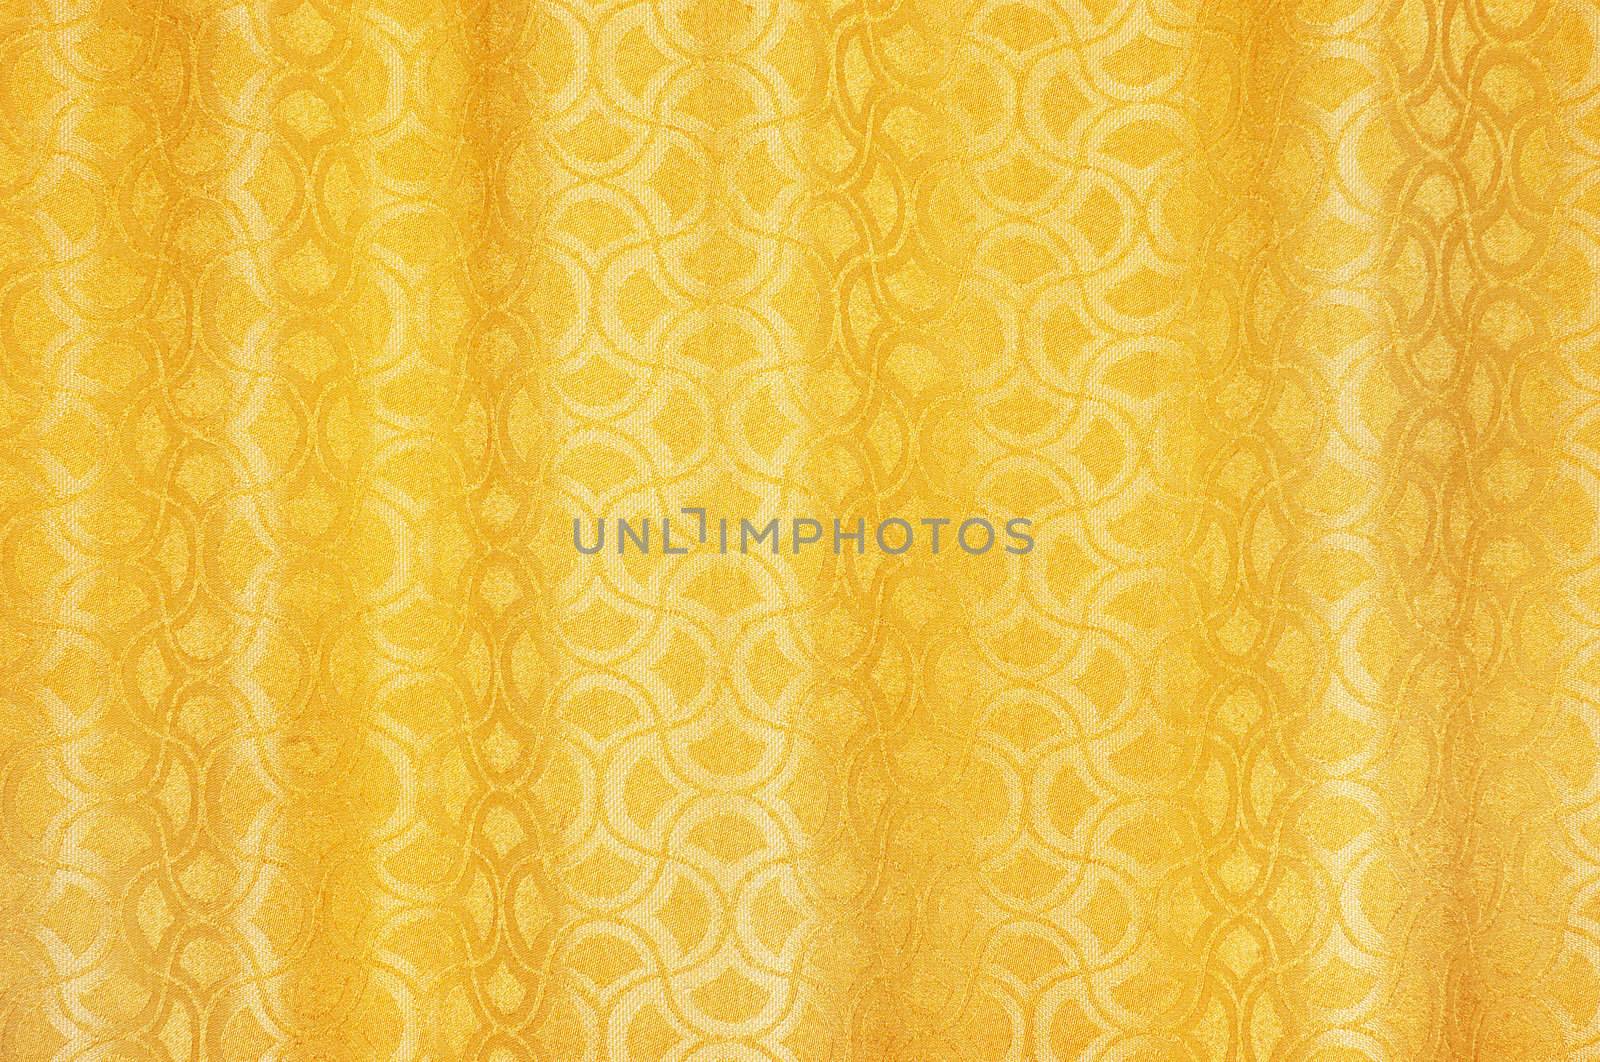 golden colored curtains textured background with ornaments